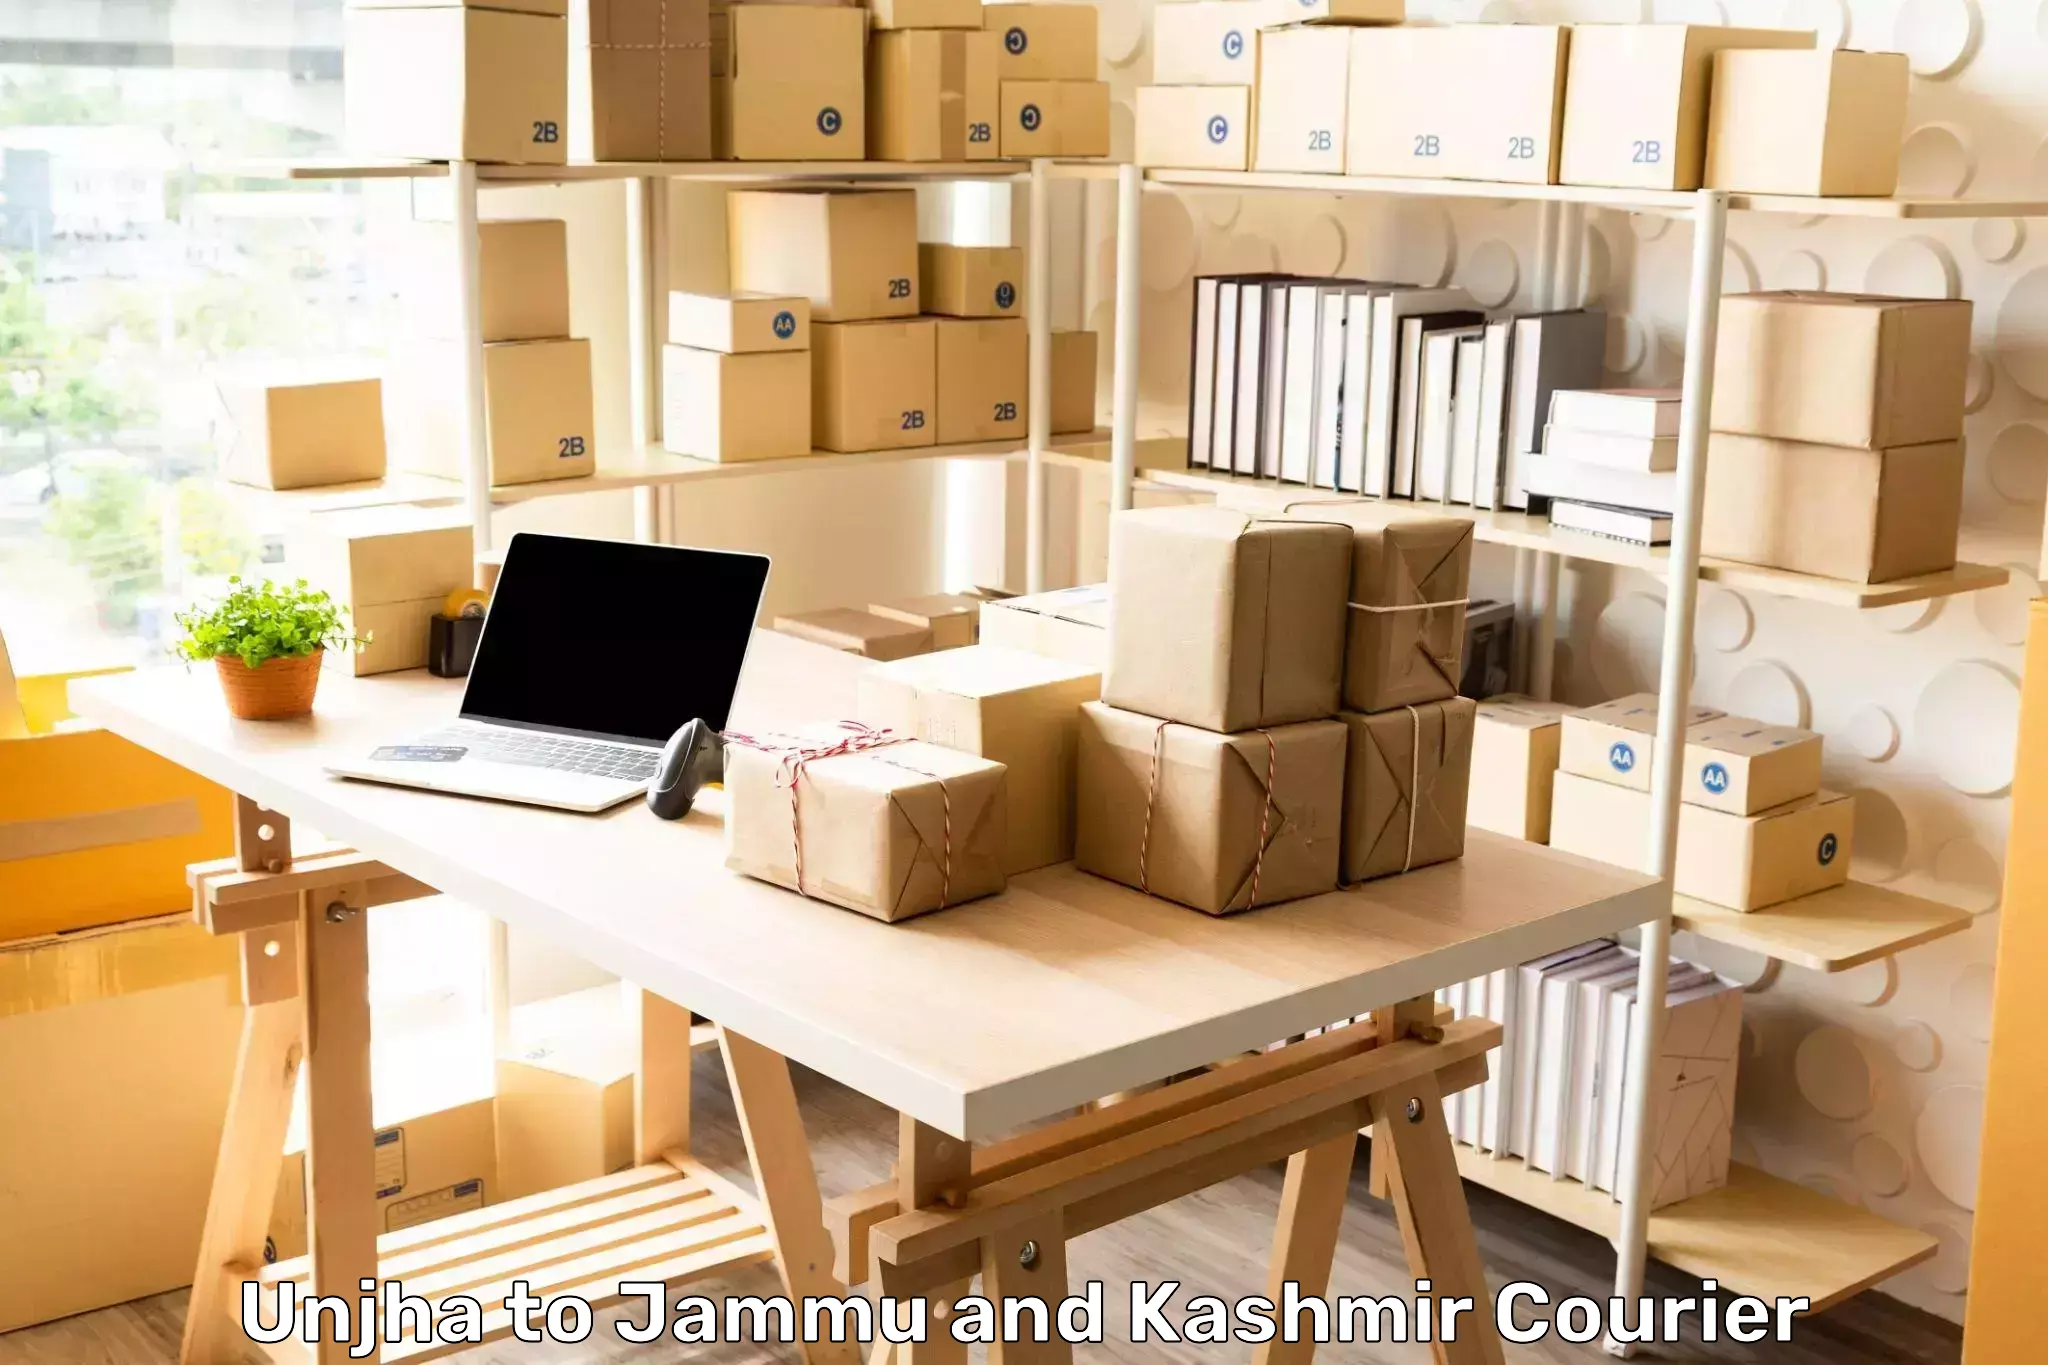 End-to-end delivery Unjha to Jammu